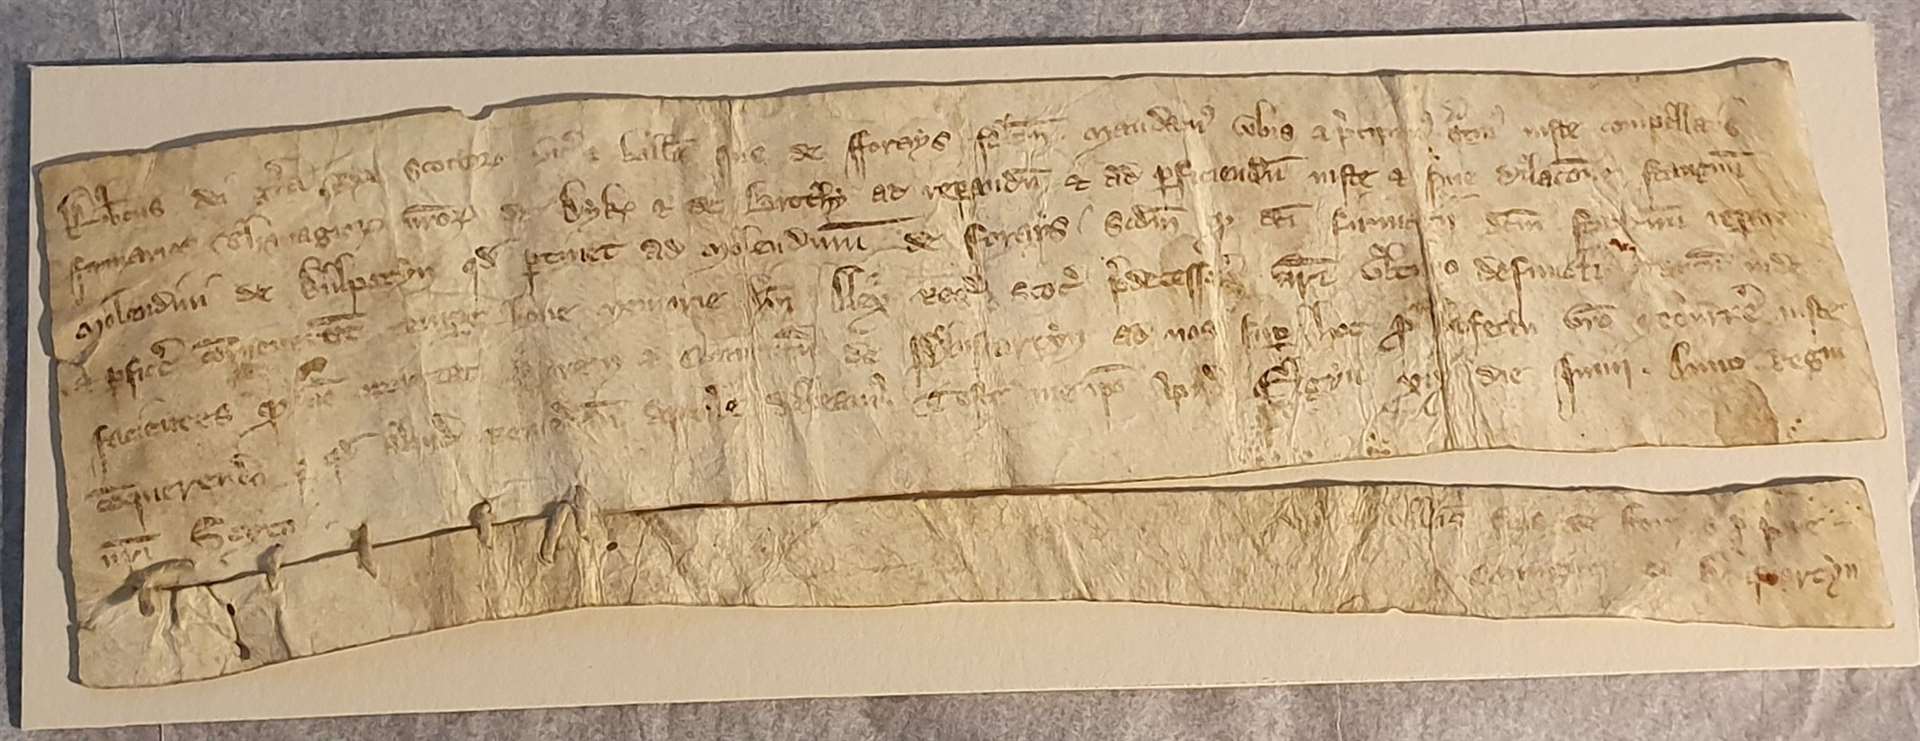 1312 letter from Robert the Bruce to Malcolm, Thane of Brodie.